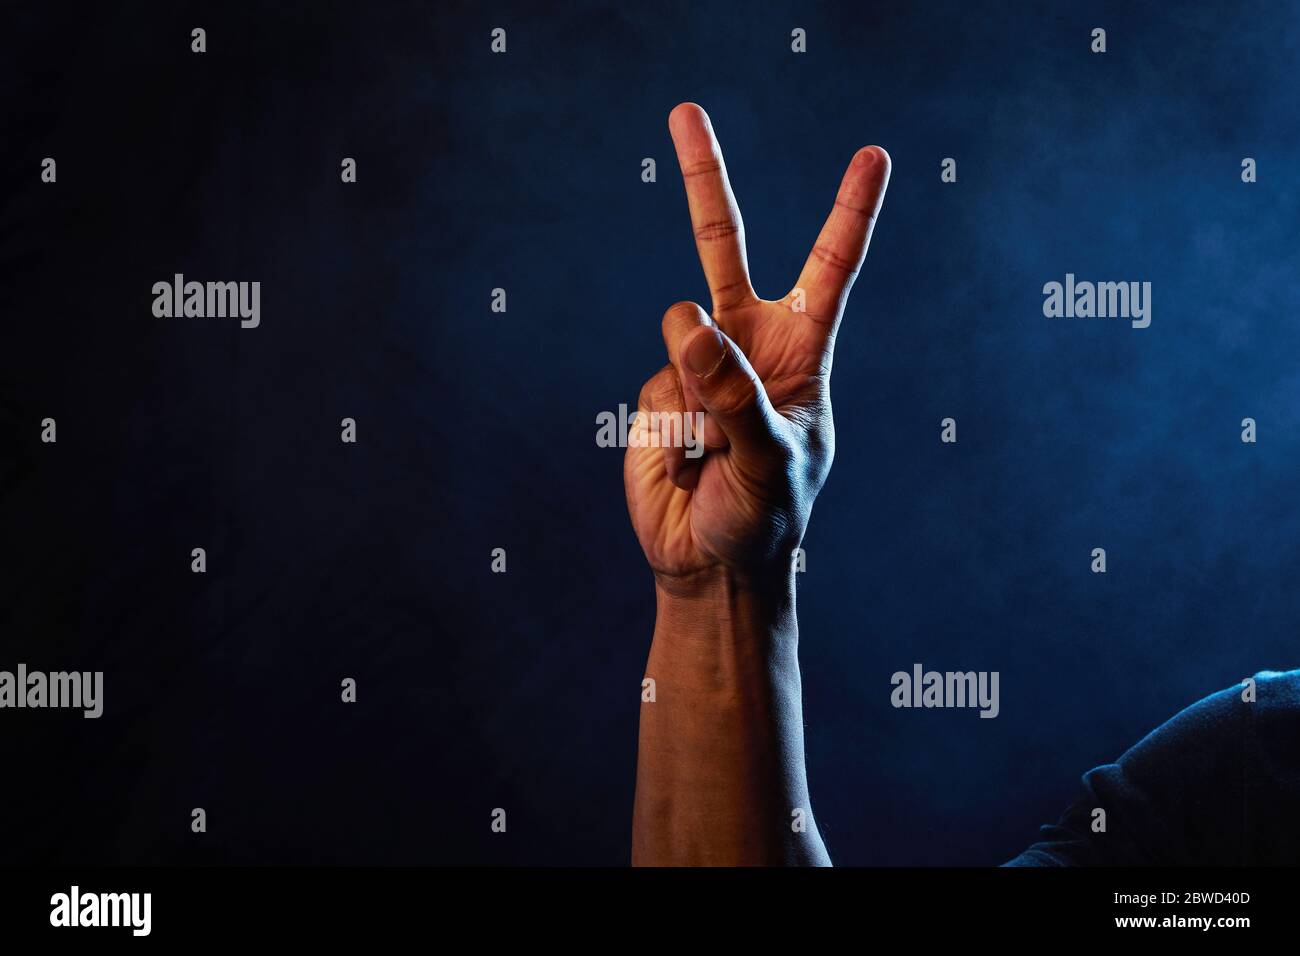 Studio image of an african american male hand holding up a peace sign with smoke background and blue lights representing police. Stock Photo